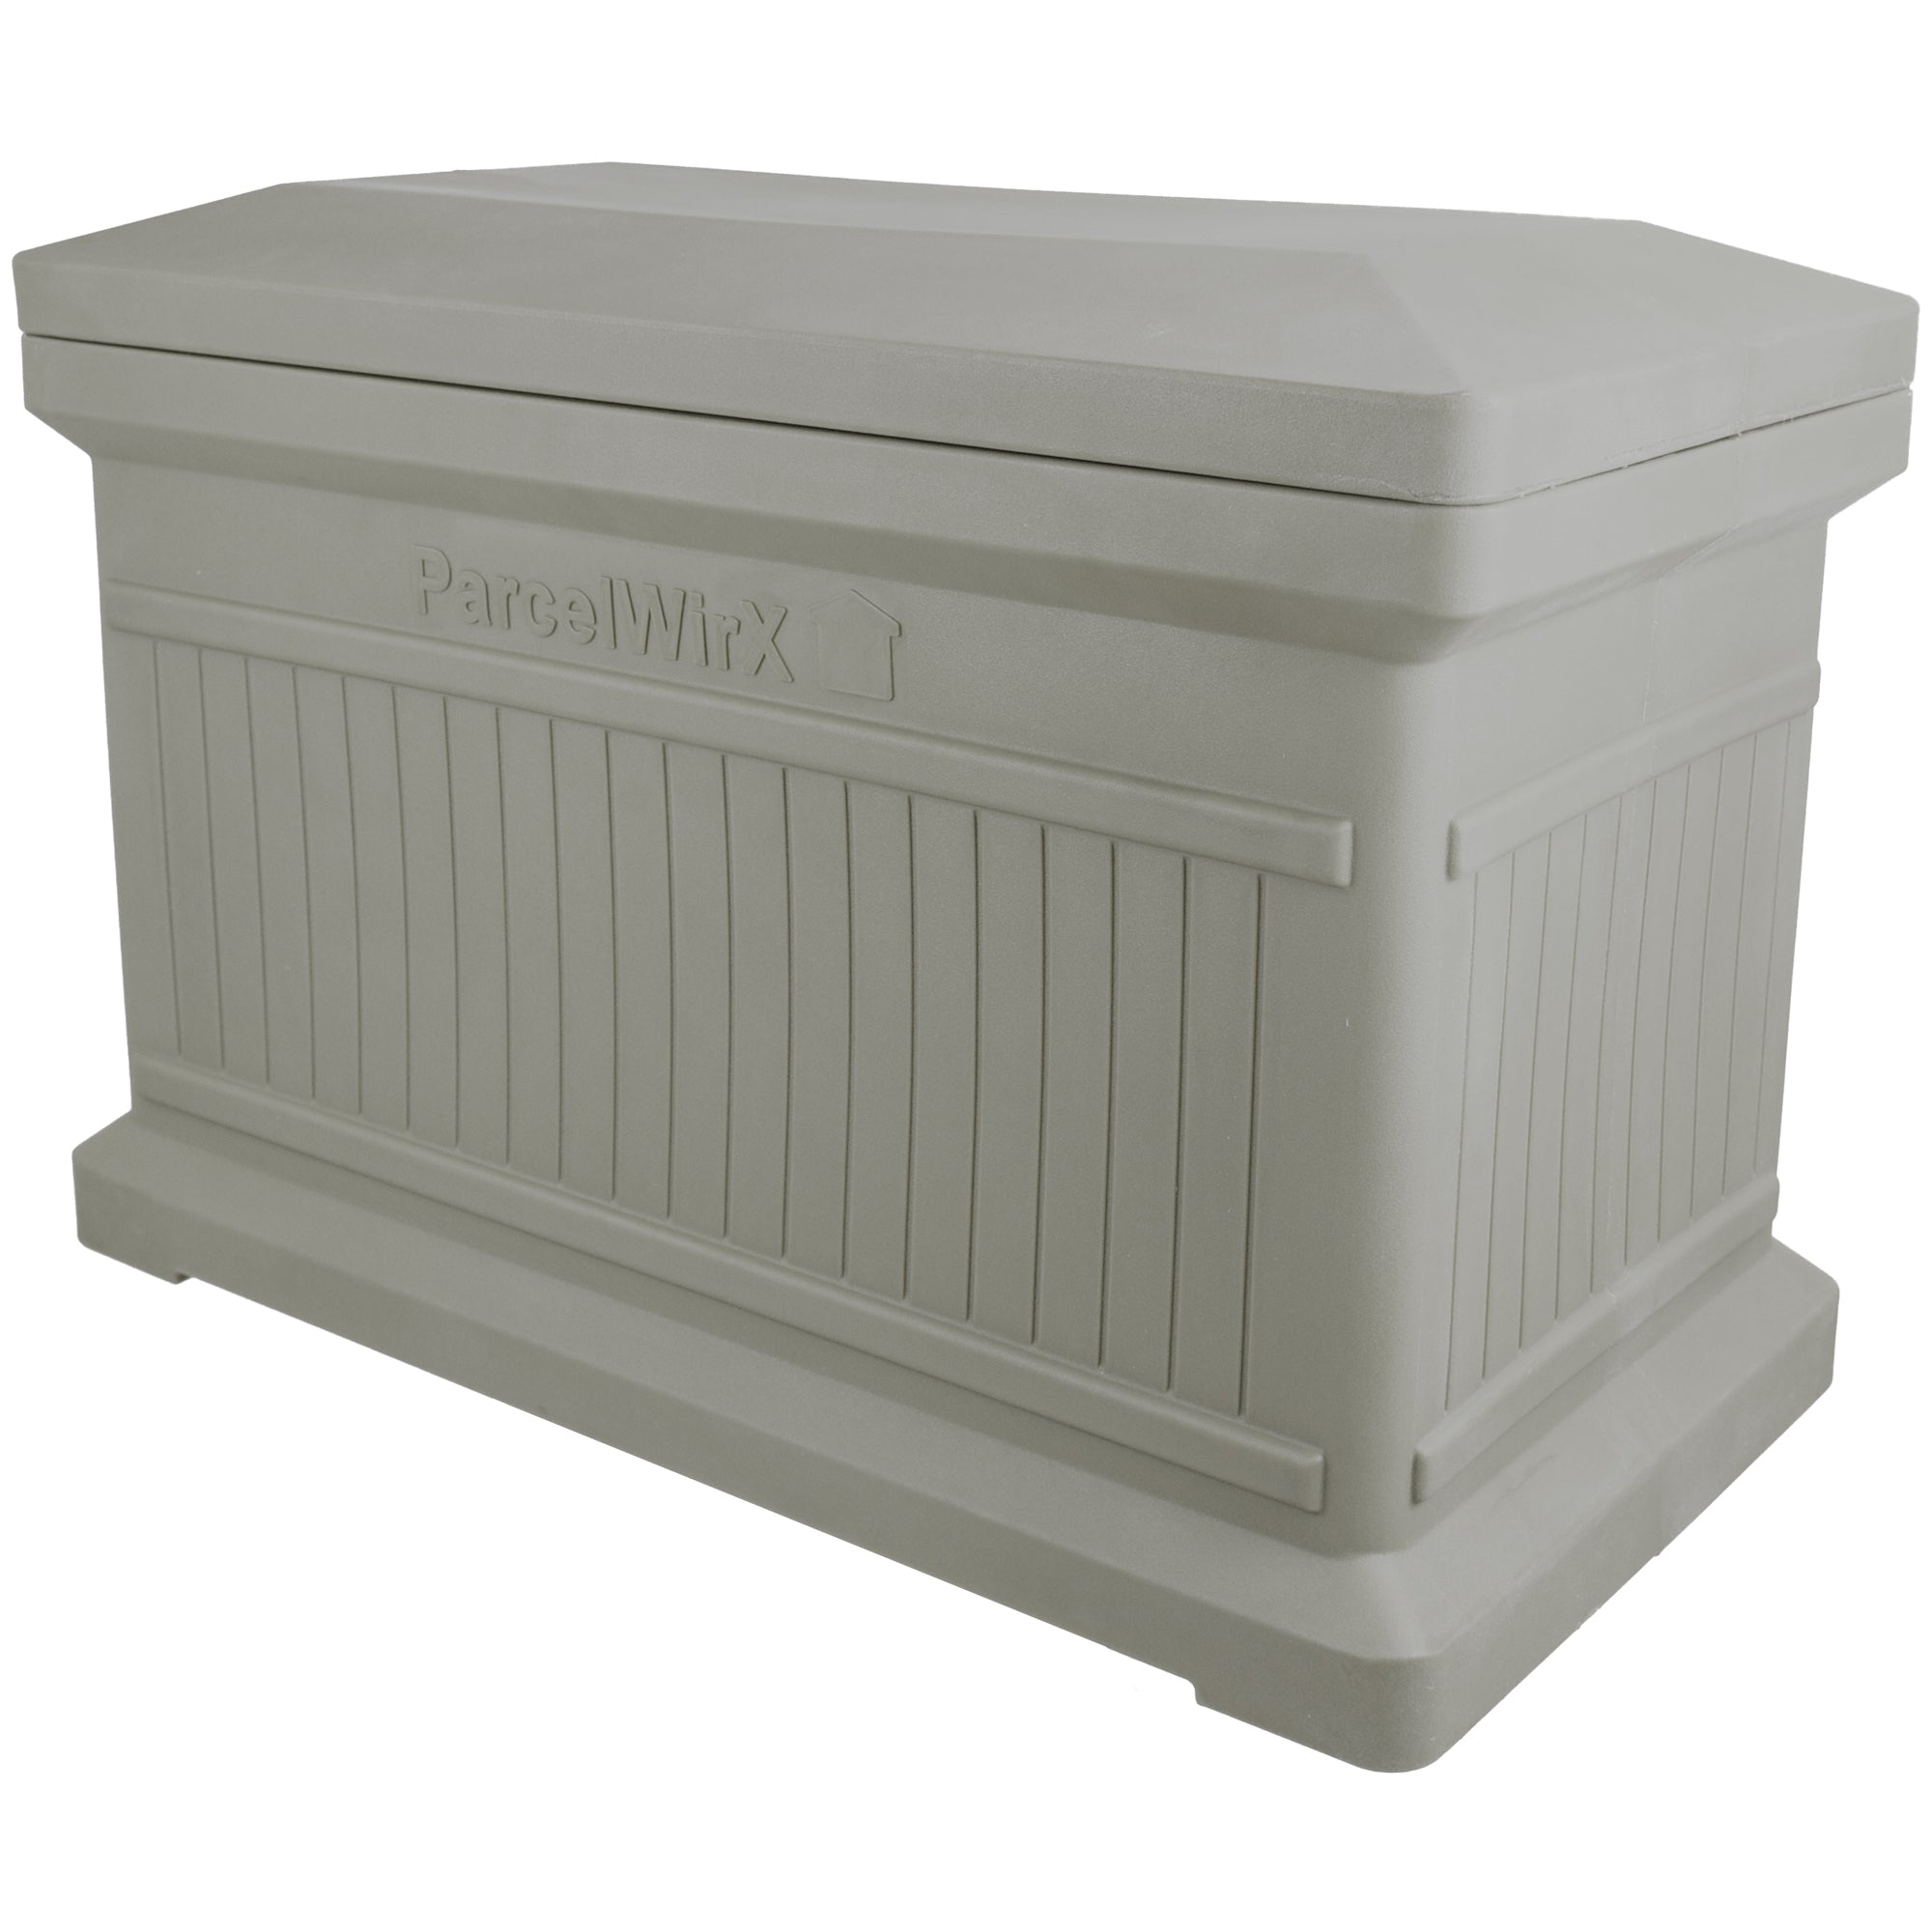 Prestige Pewter ParcelWirx horizontal standard on an angle the lid on, white background